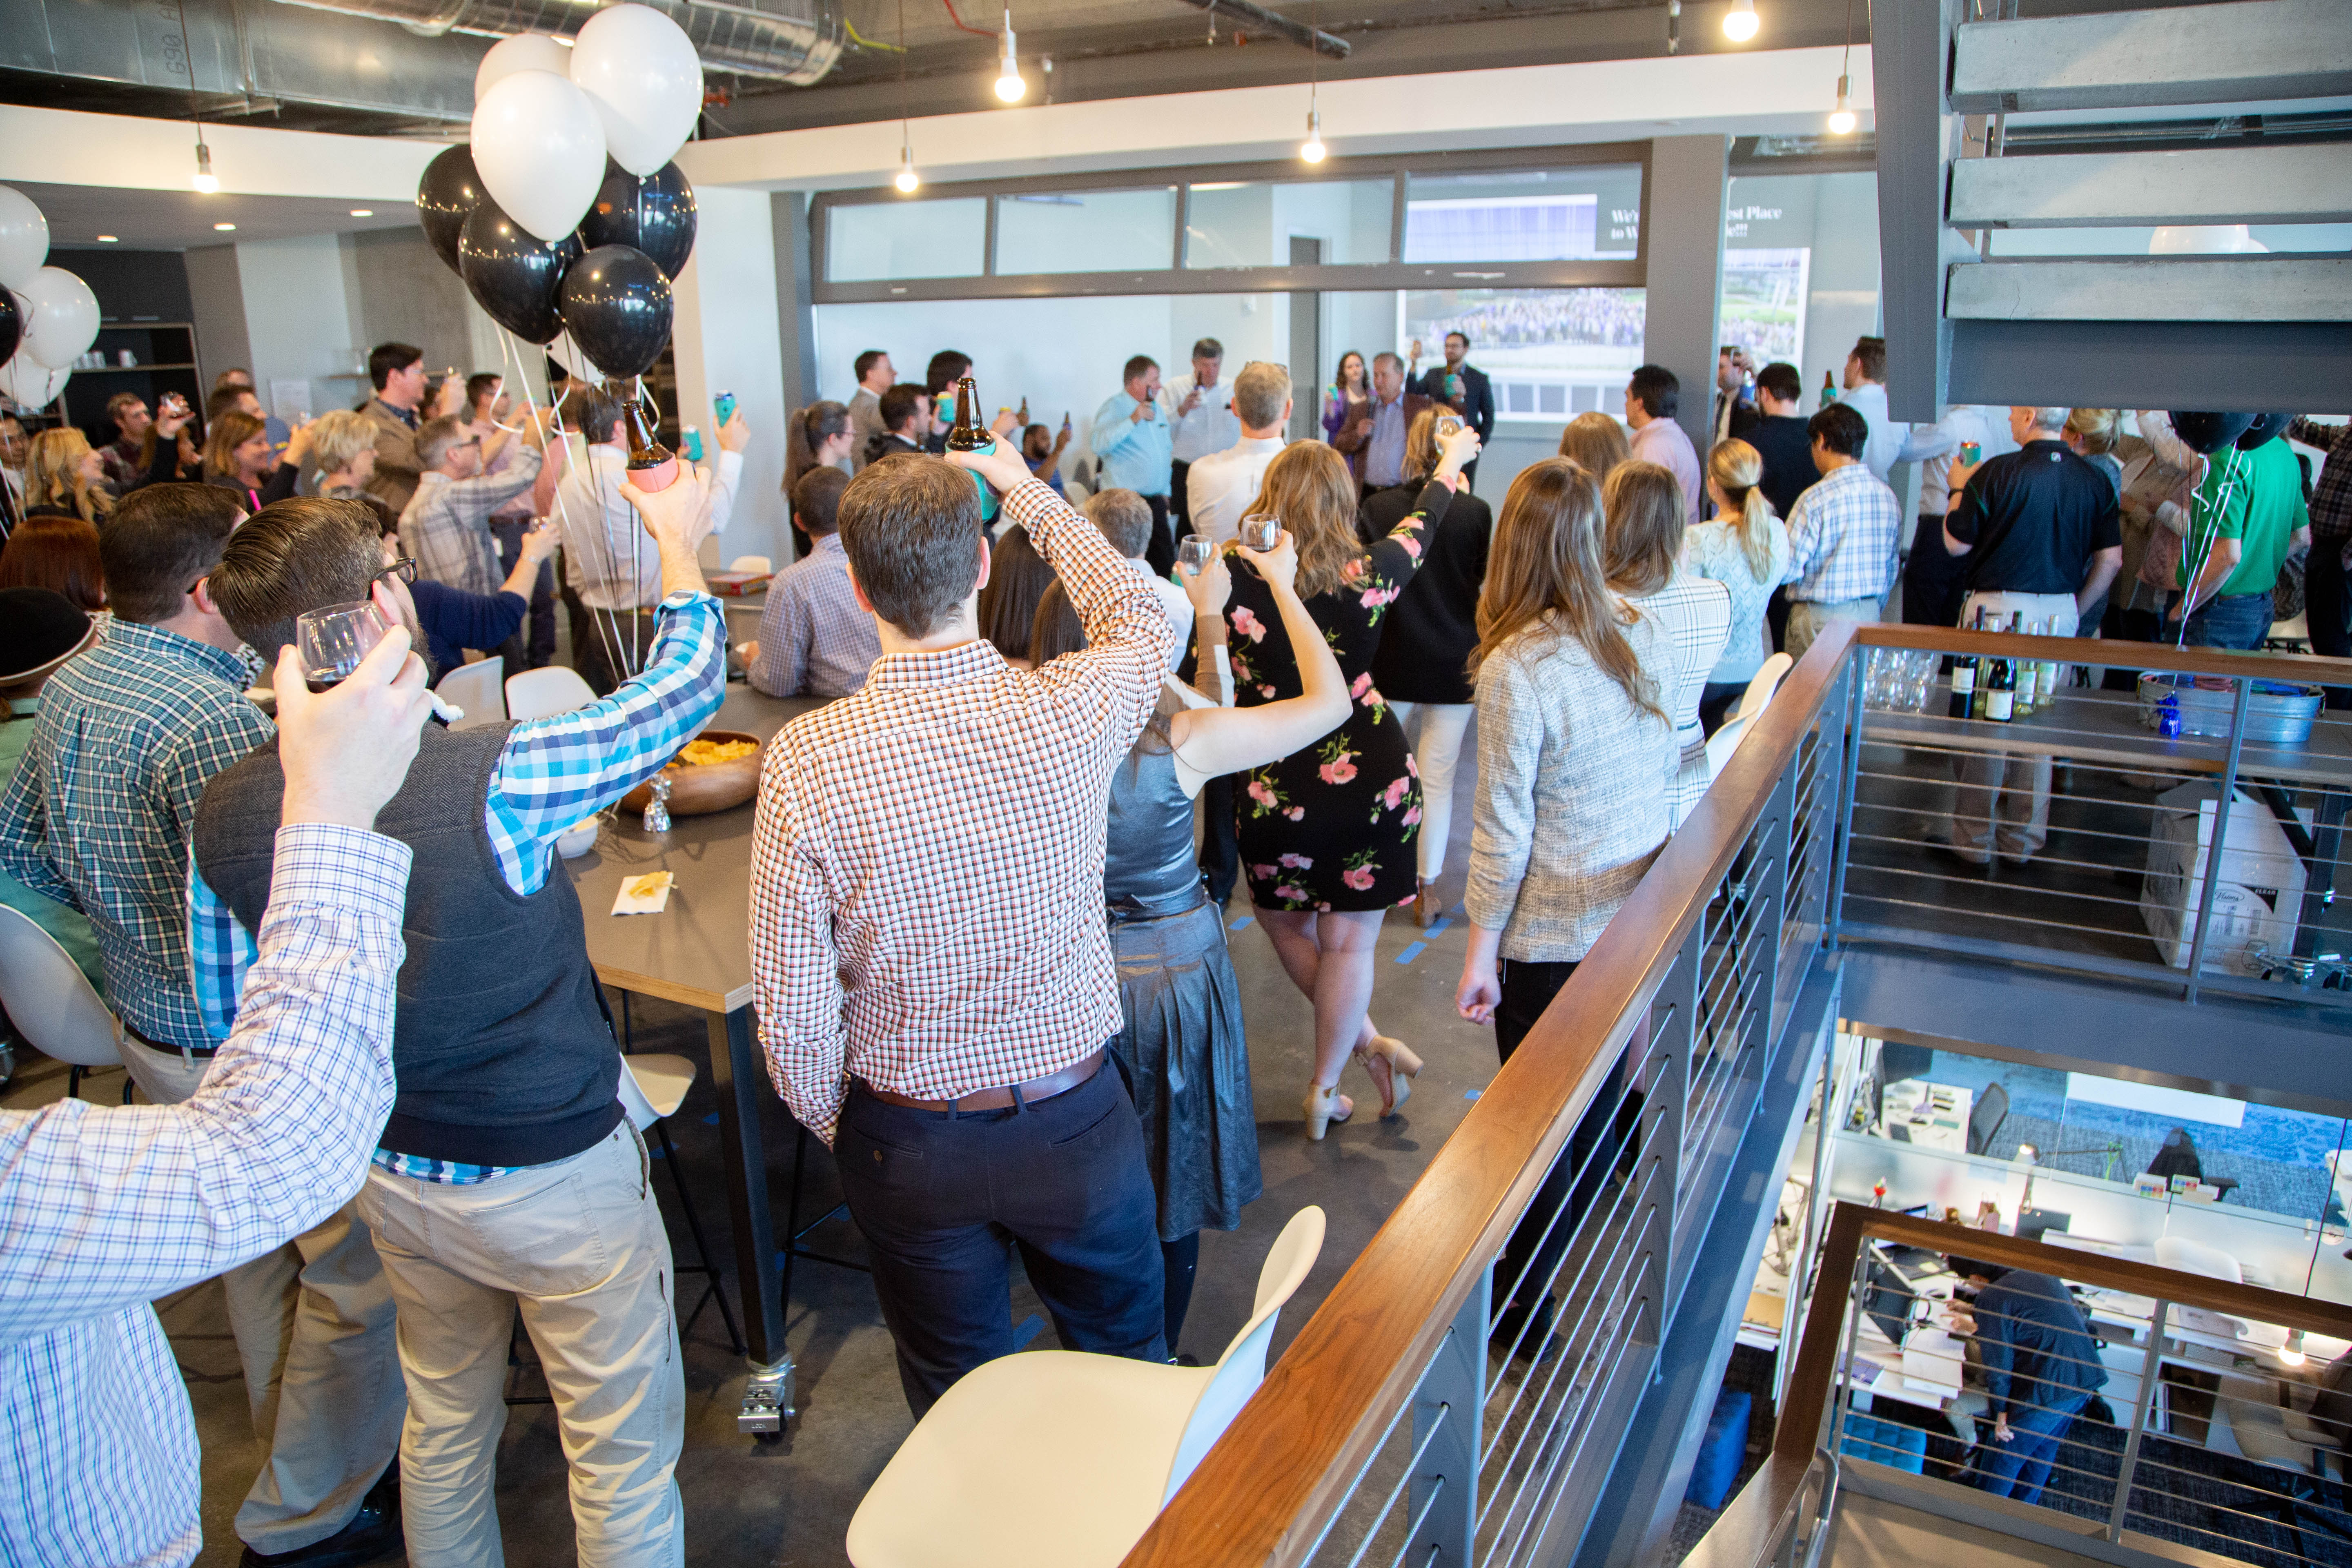 Nashville staff gathered for a happy hour celebration to toast to the recognition.